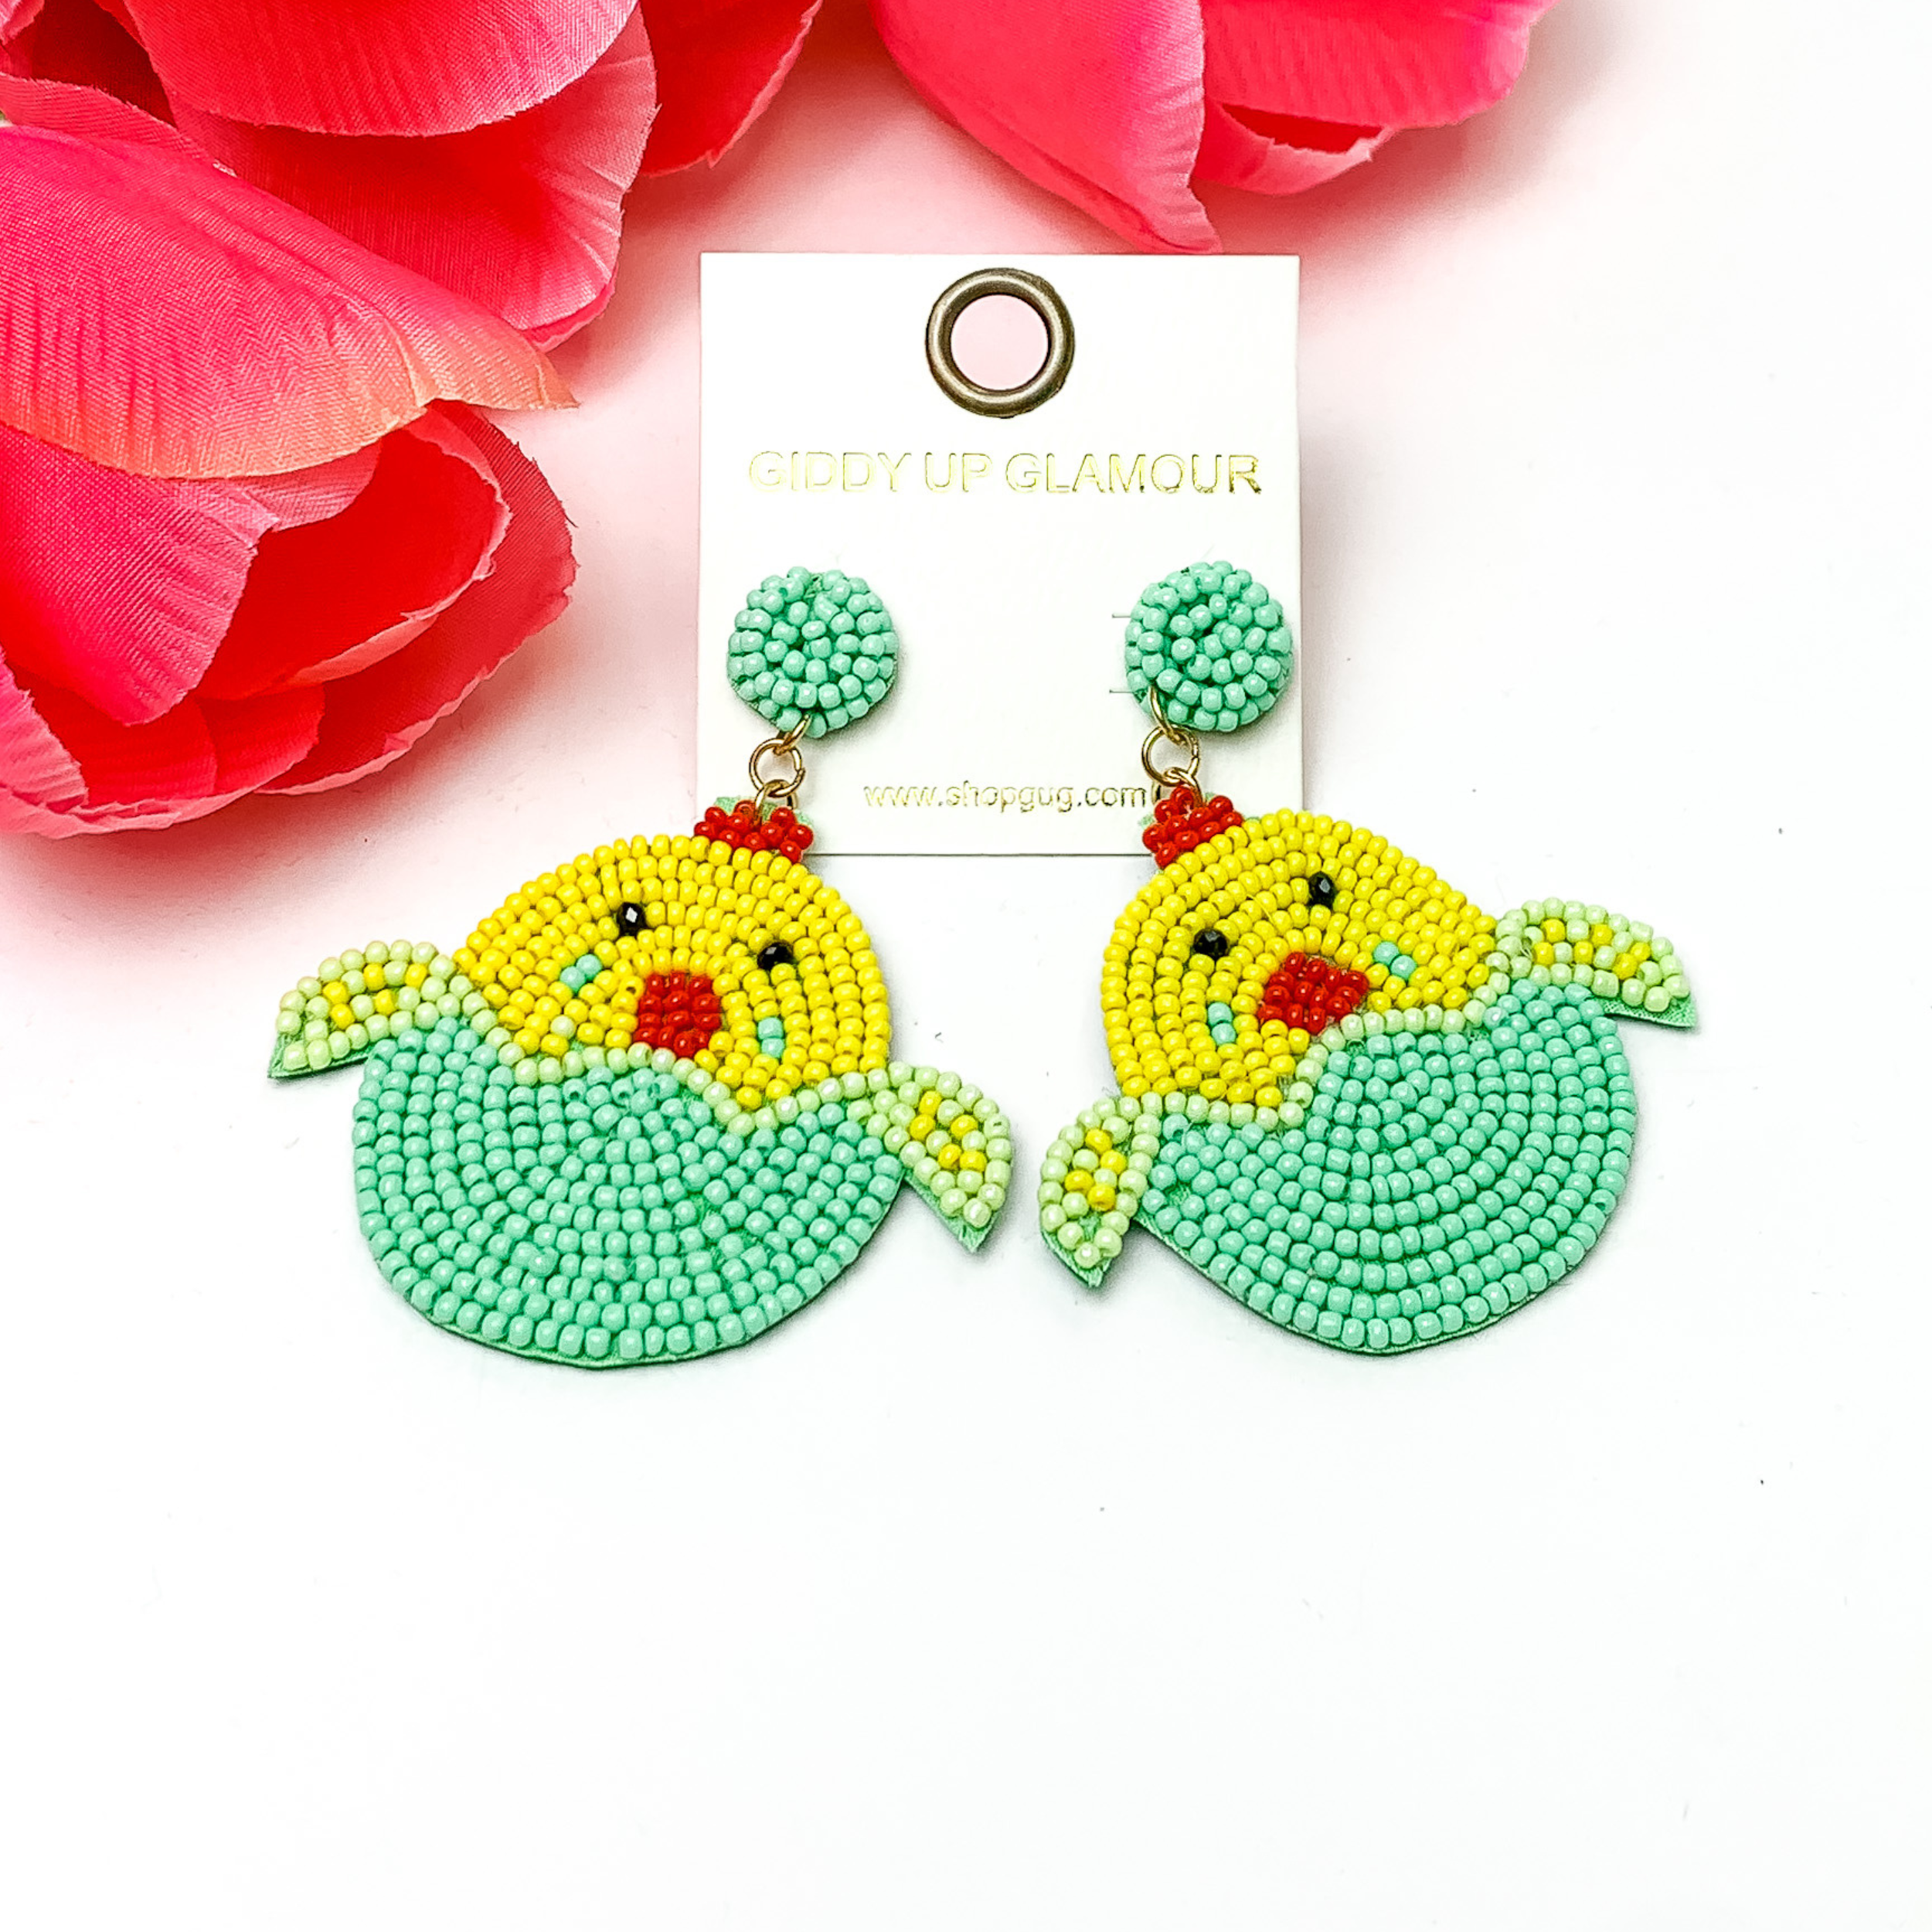 Beaded, mint Easter egg earrings with a yellow beaded chick hatching. Pictured on white background with red-coral colored flowers.